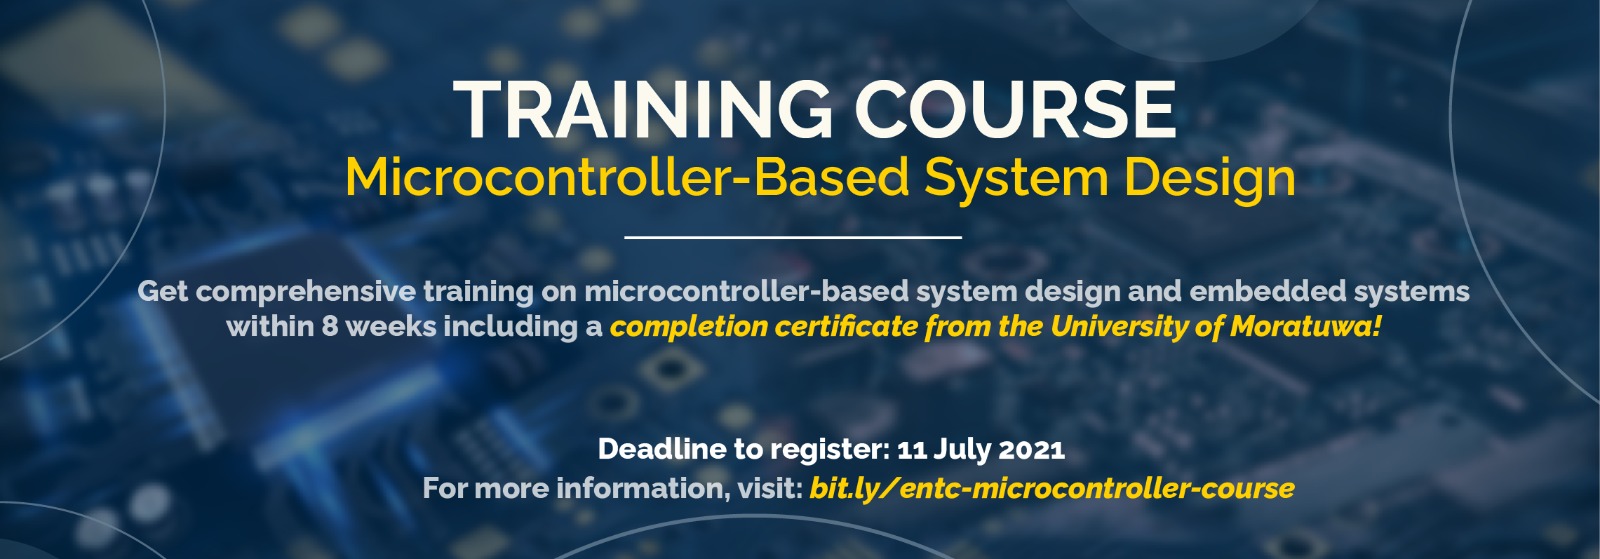 Training Course on Mircocontroller Based System Design